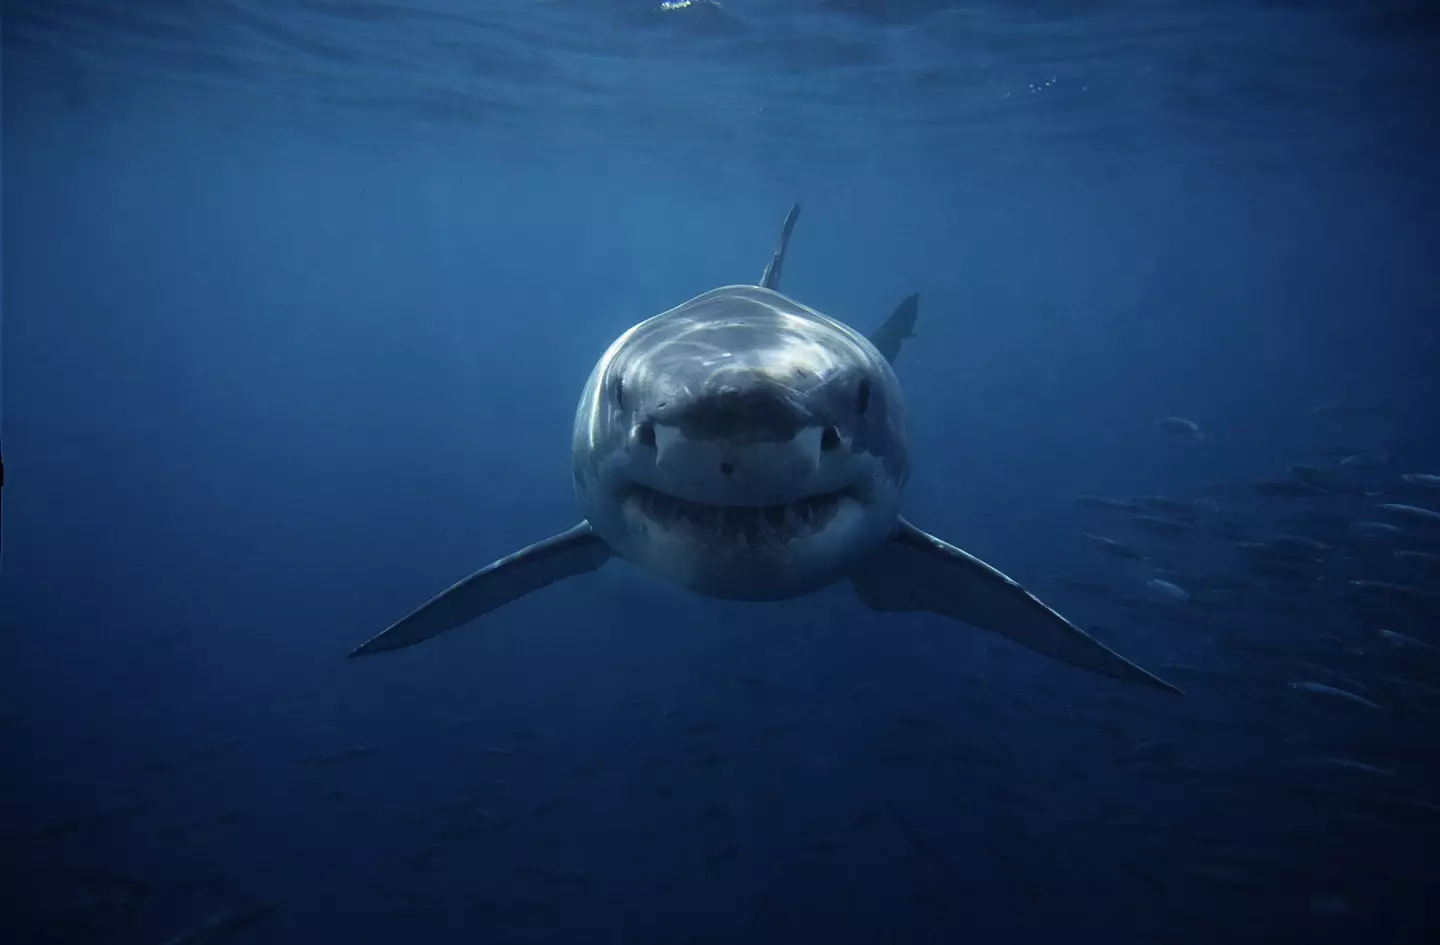 Great white sharks are one of the most ferocious predators in the ocean.